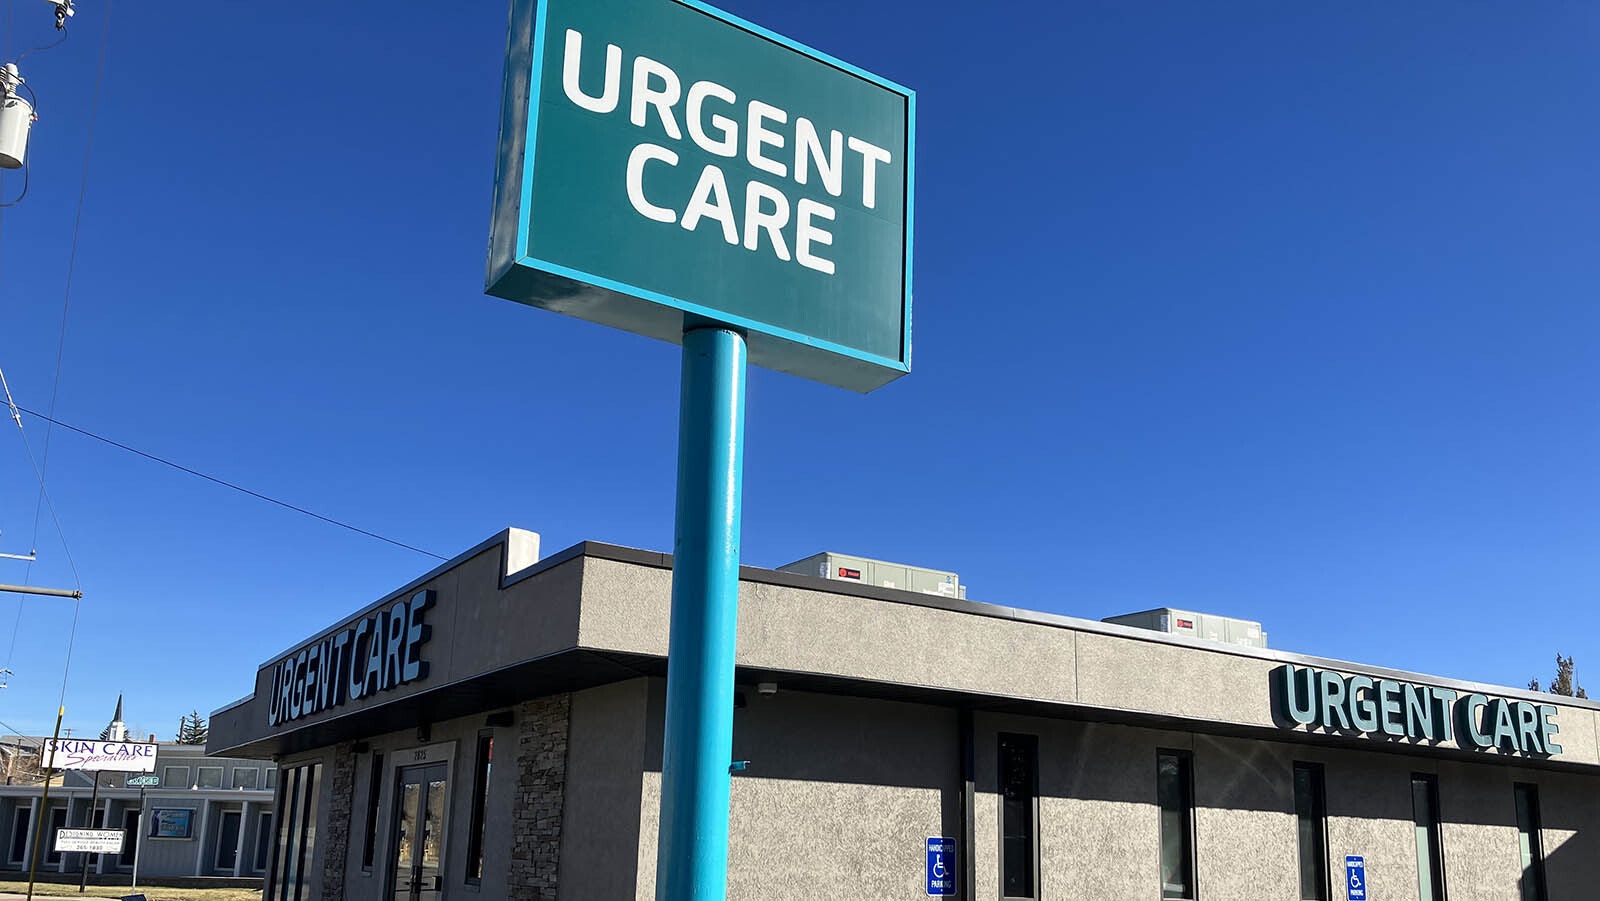 BestMed Urgent Care in Casper staff confirm respiratory viruses are active in the community.